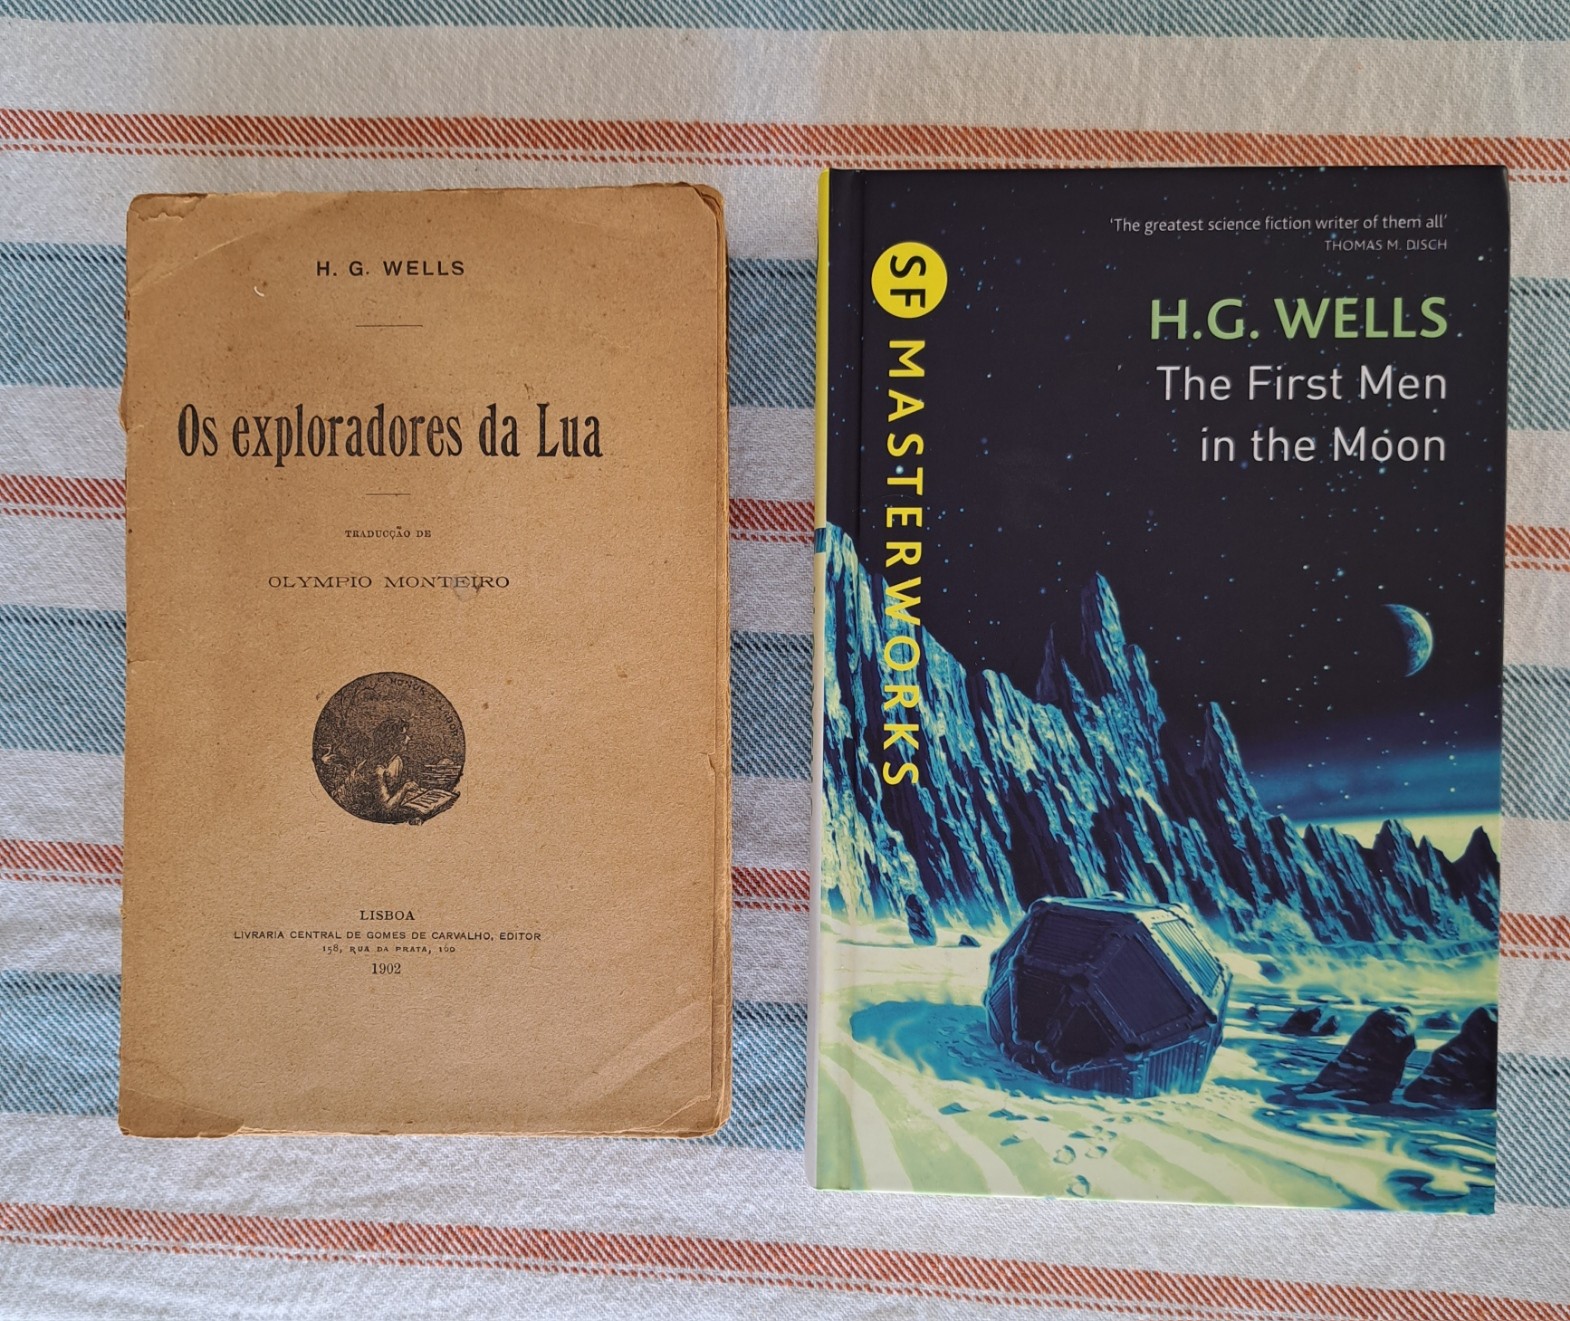 Two editions of H. G. Wells' "The First Men in the Moon", one in Portuguese, from 1902, the other in english (with an introduction by Lisa Tuttle).